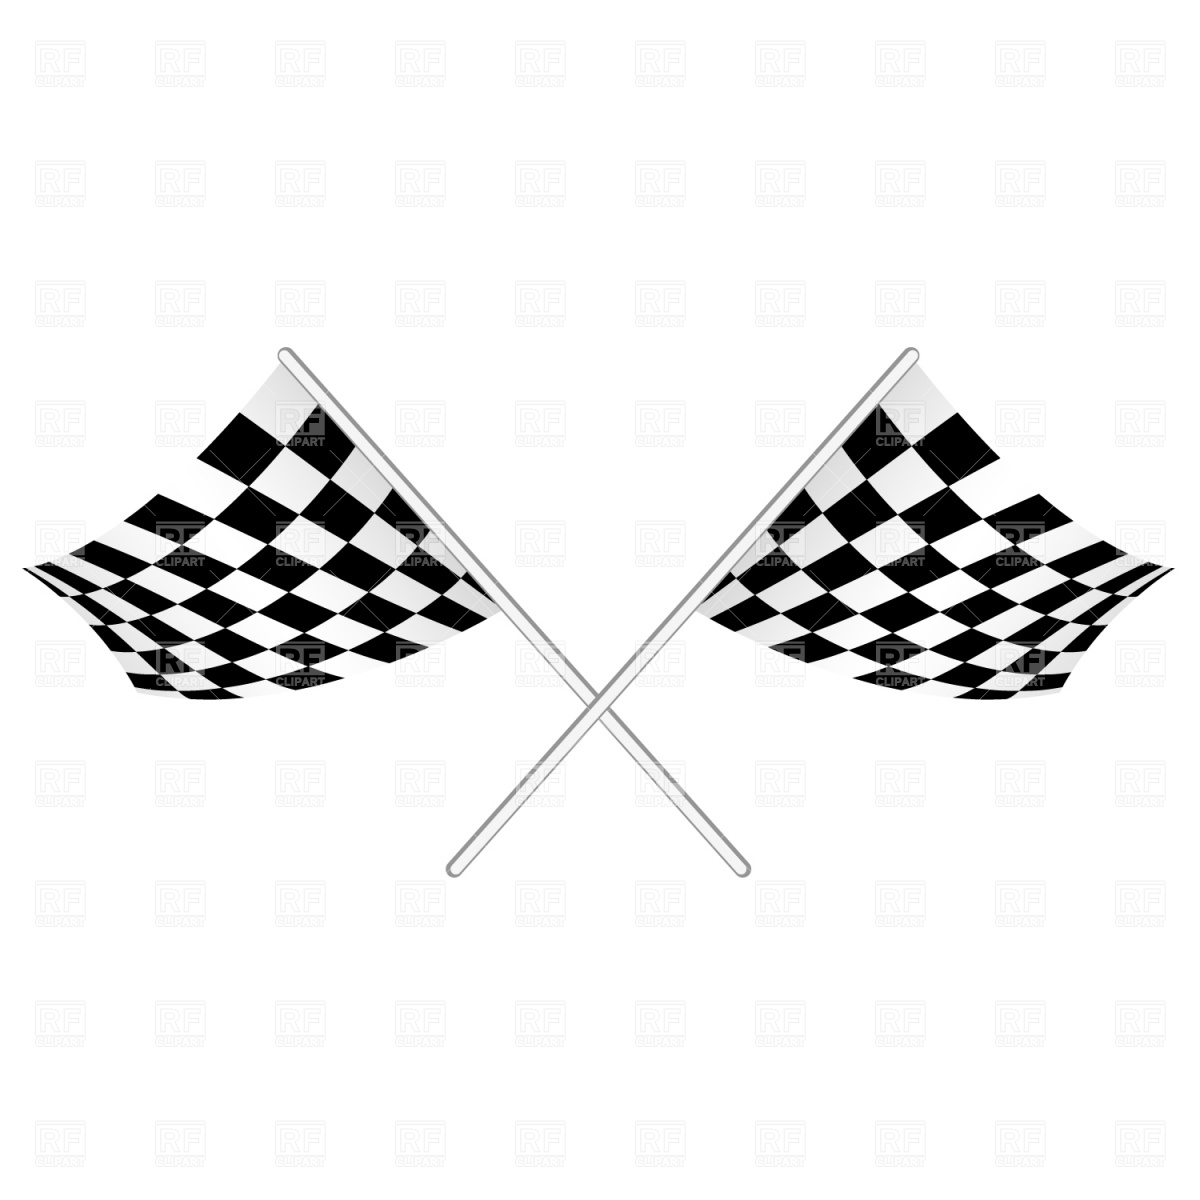 Checked Start Flag Download Royalty Free Vector Clipart  Eps